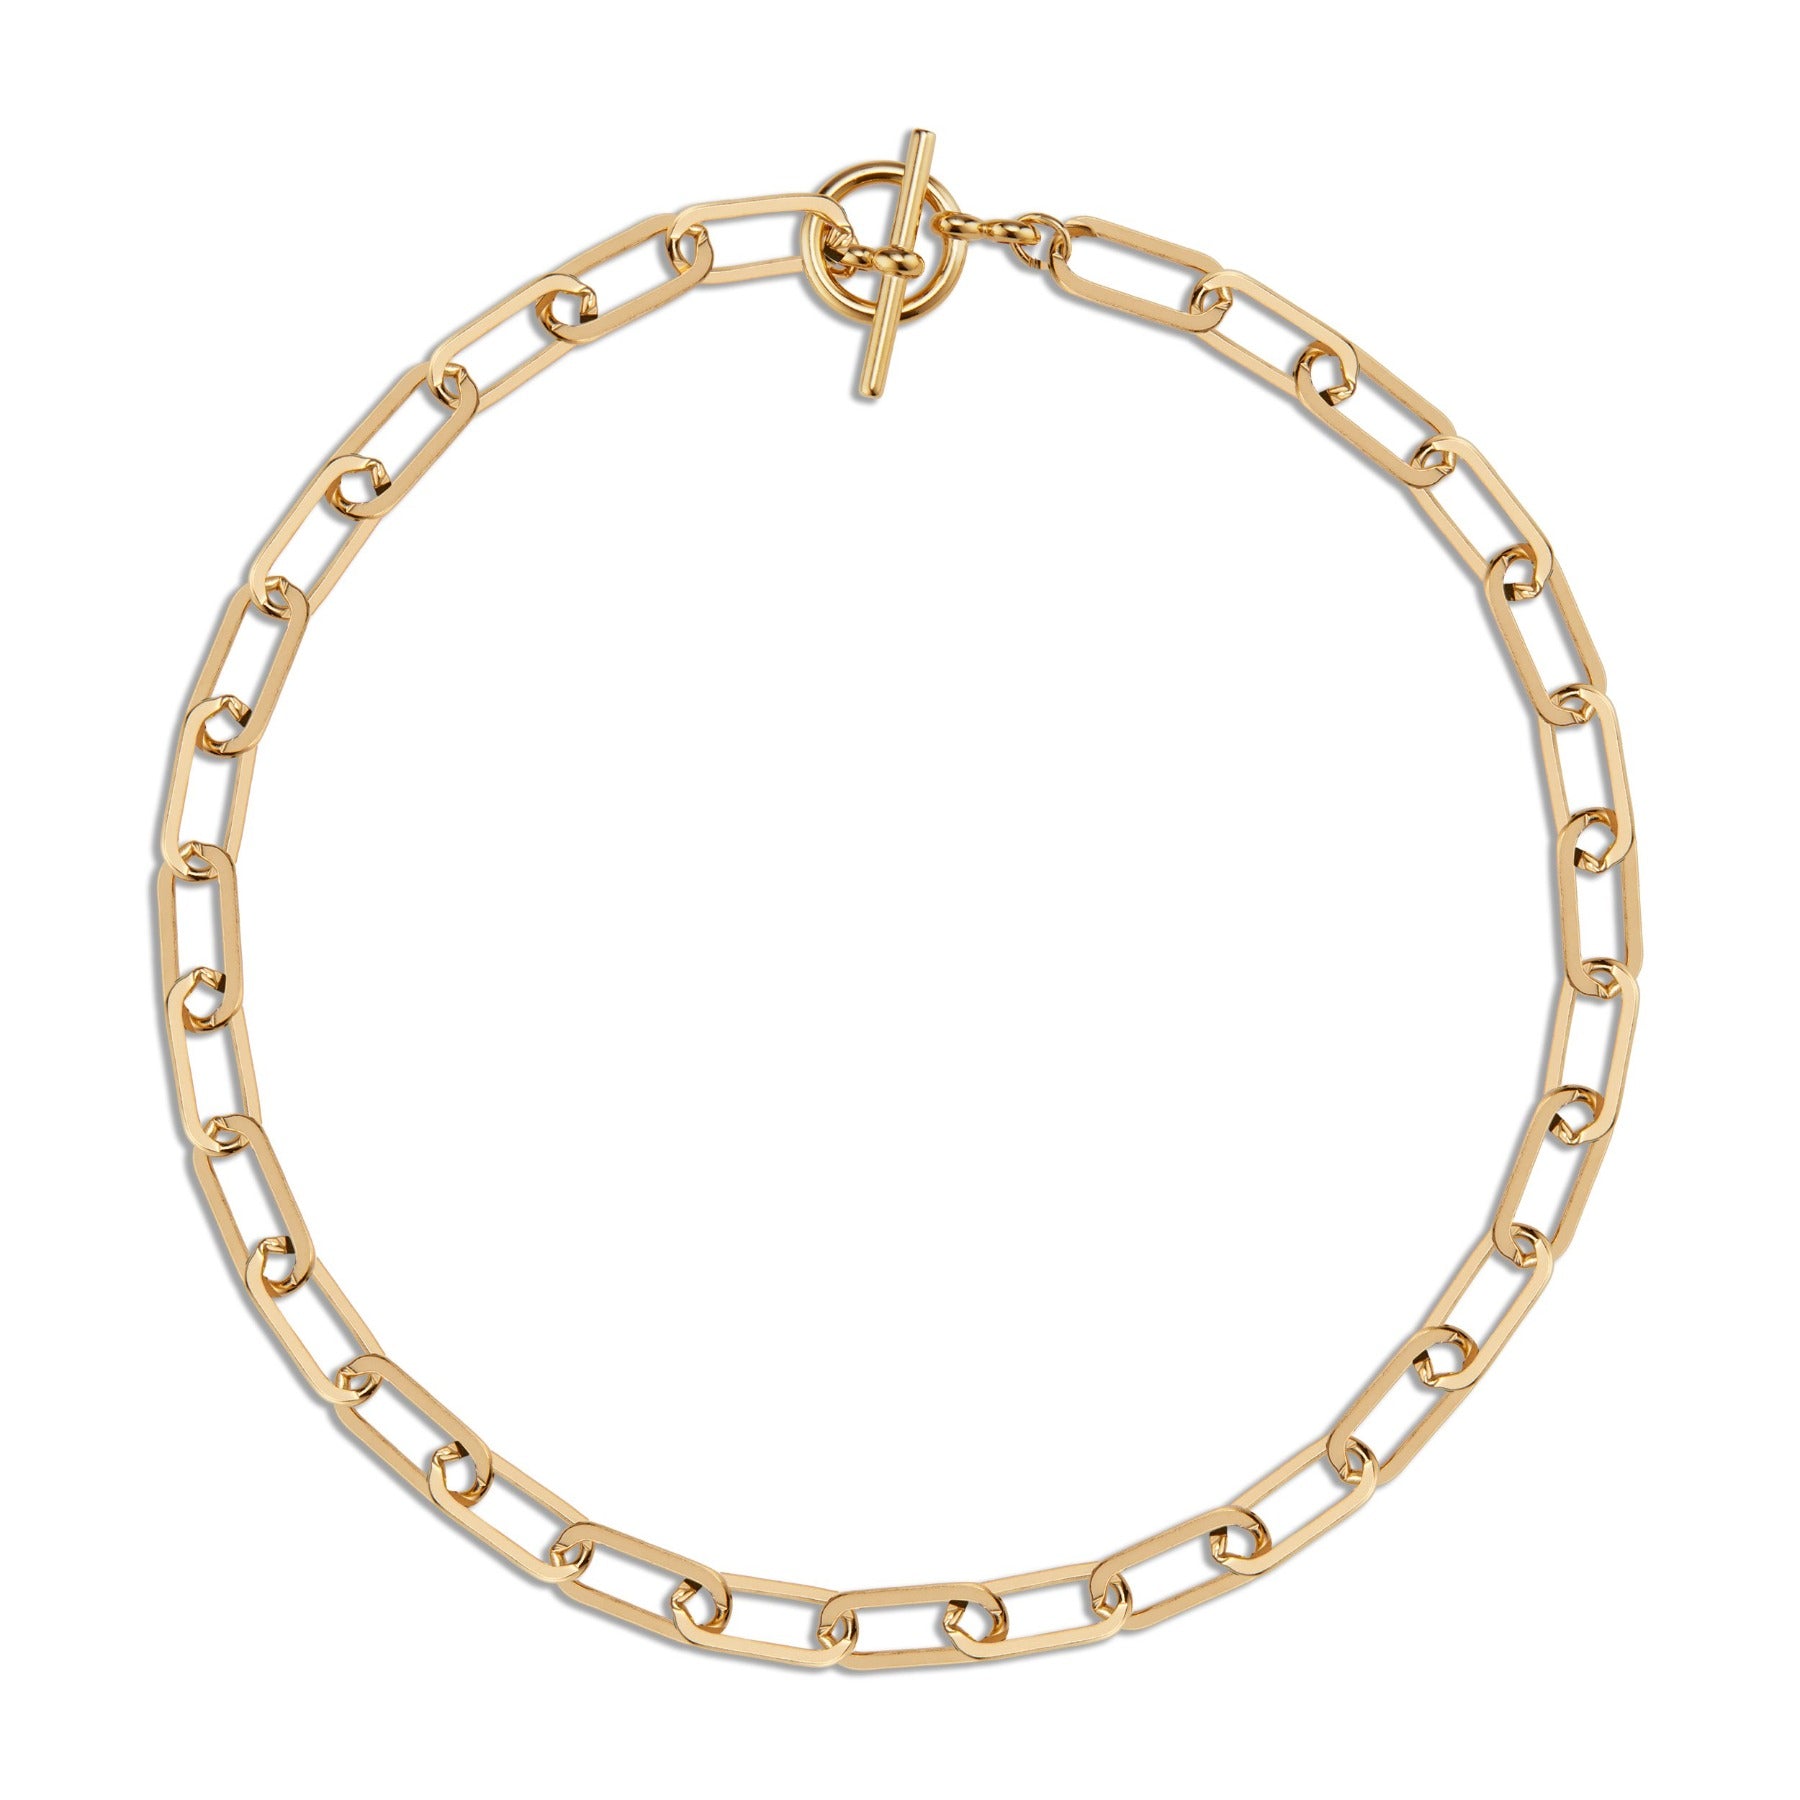 Elongated flat chain link toggle clasp necklace in 18k gold vermeil.